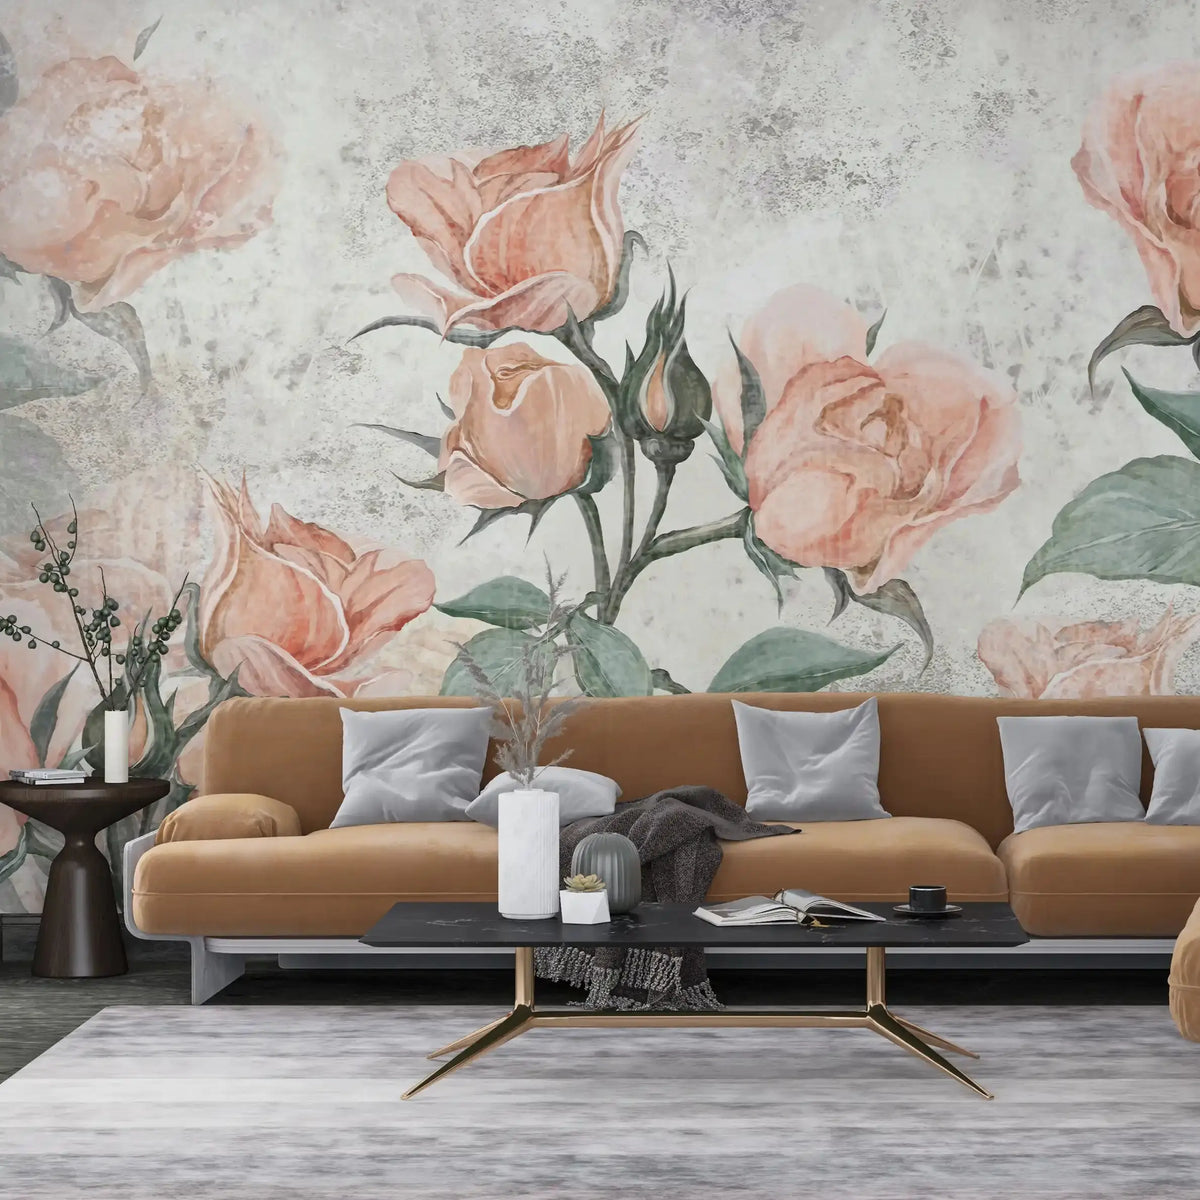 3002-B / Floral Peel and Stick Wallpaper - Orange Roses Mural, Vintage Mural for Wall Decor, Ideal for Bedroom and Bathroom - Artevella